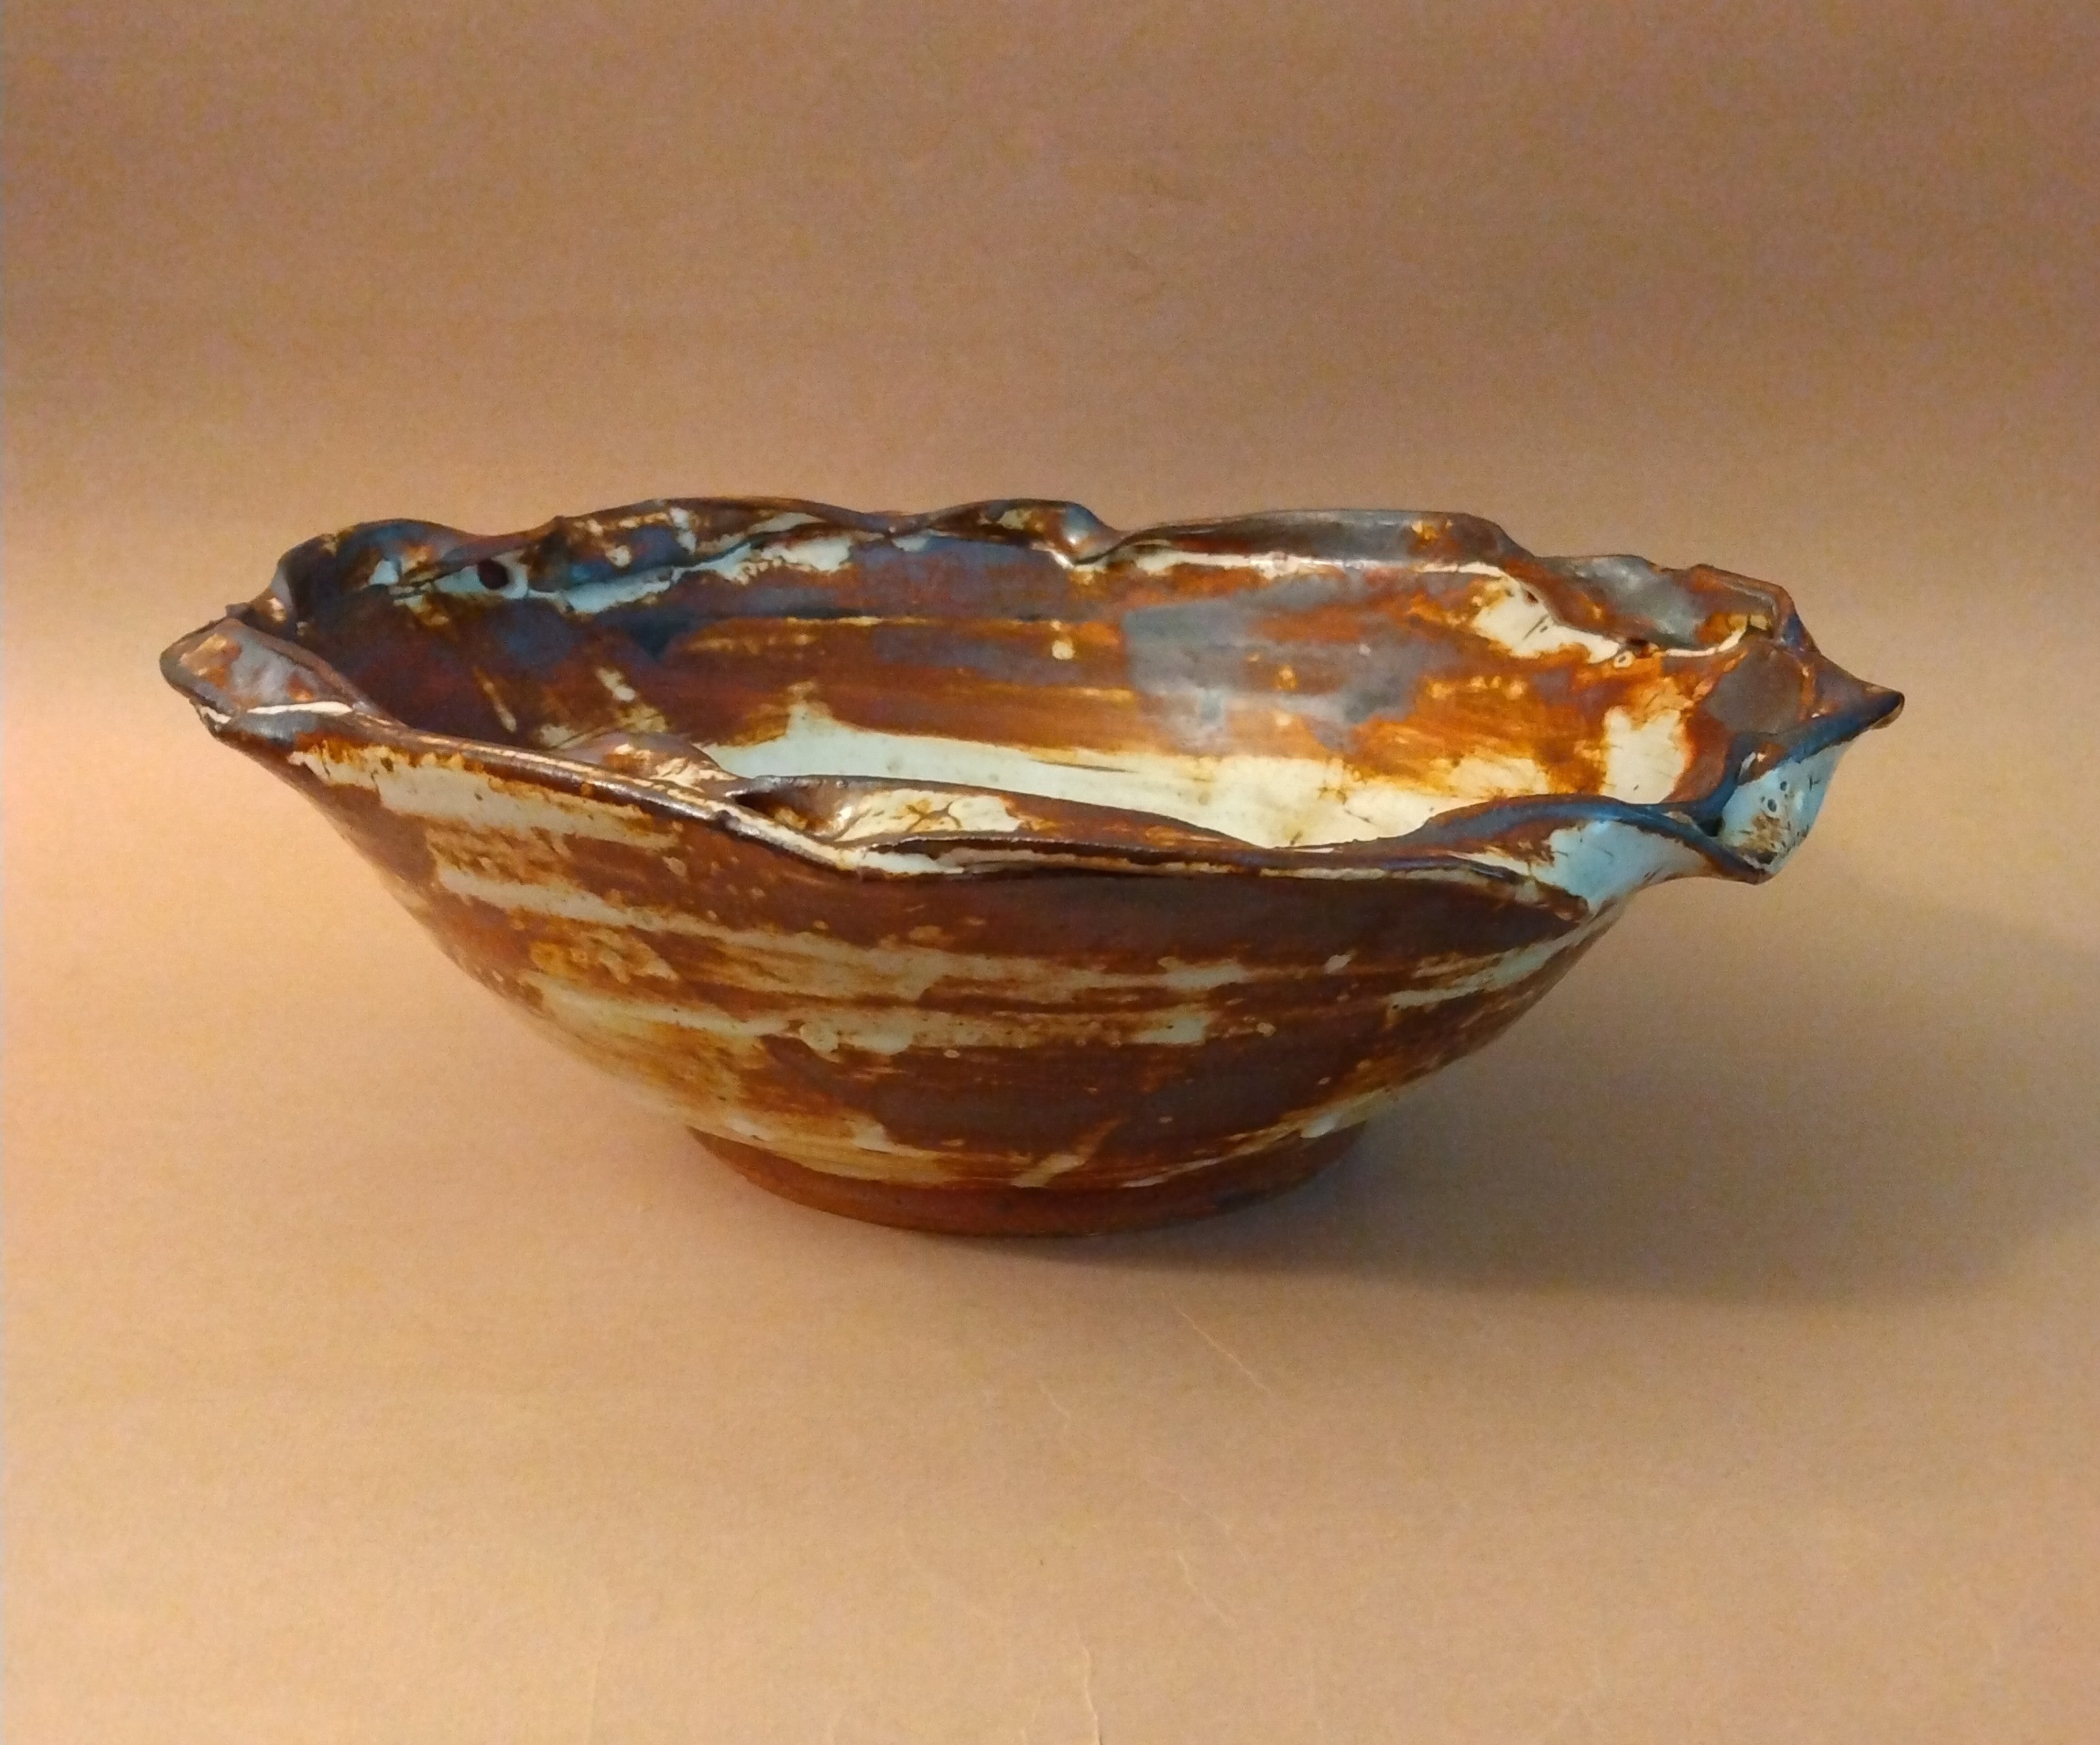 20% donated to Maui Wildfire Relief - Bamboo Ash and Shino Glazed Serving Bowl by Sachiko Furuya